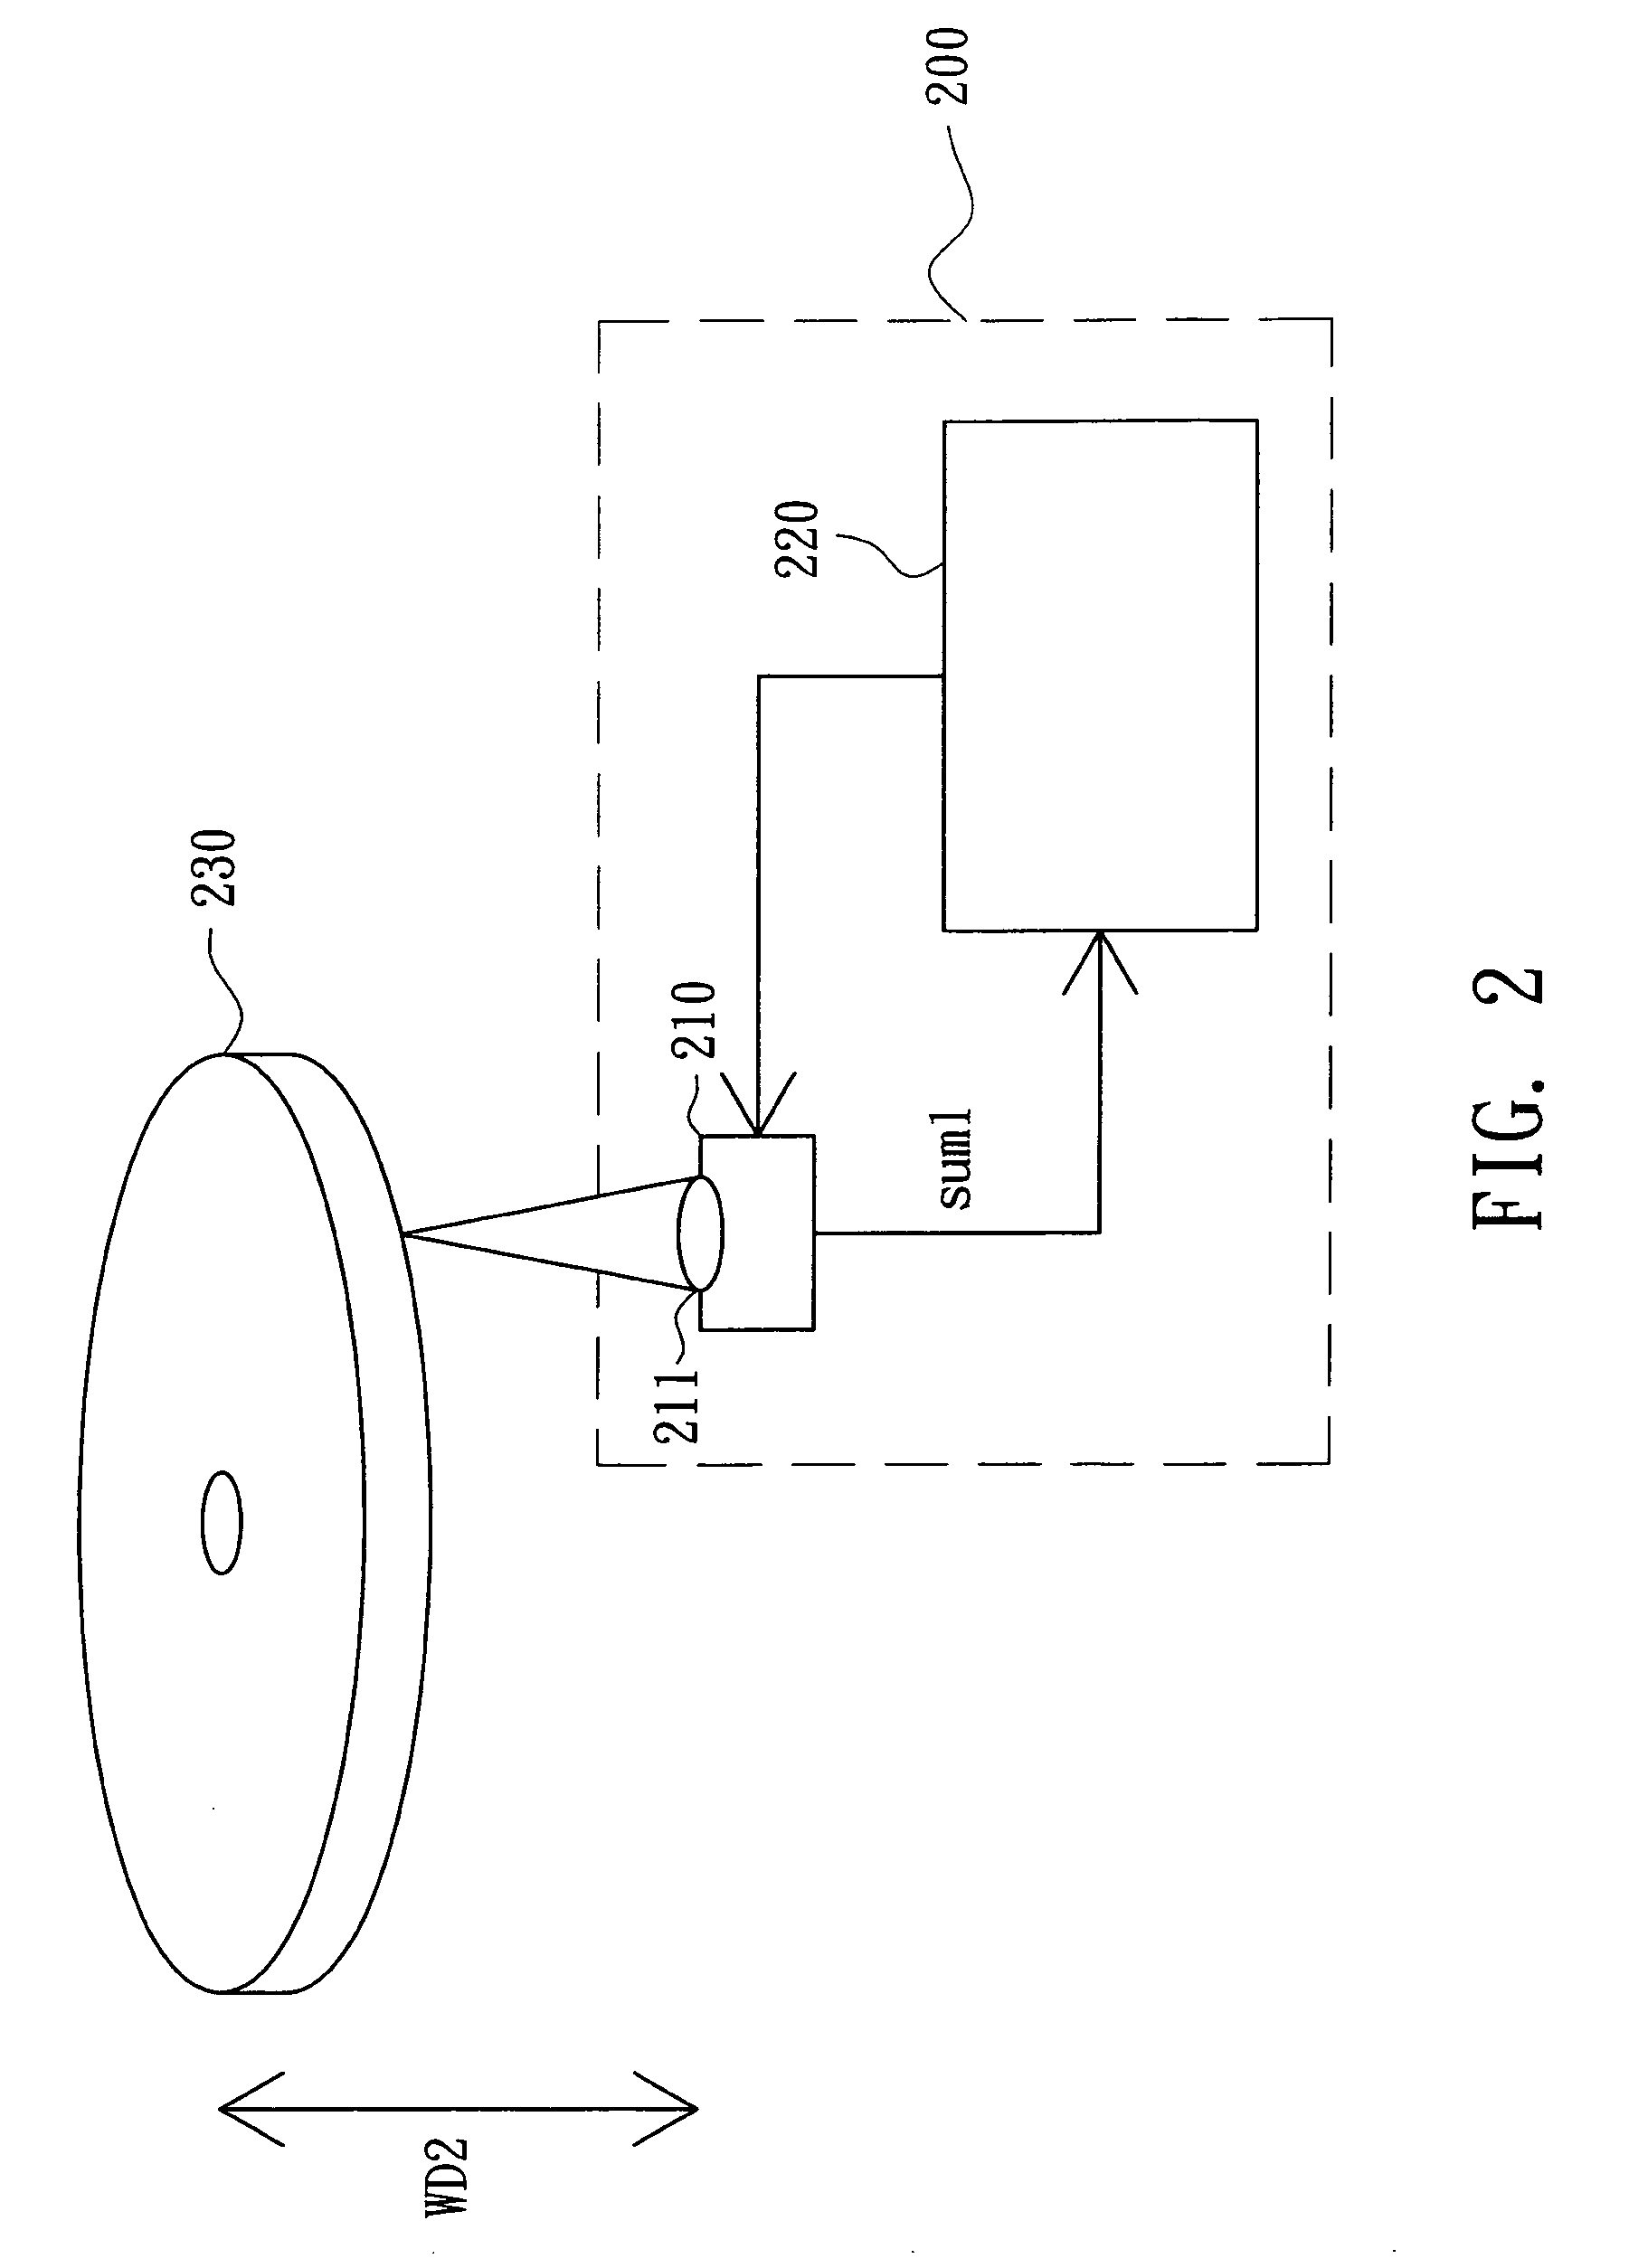 Optical disk drive and method of determining working distance